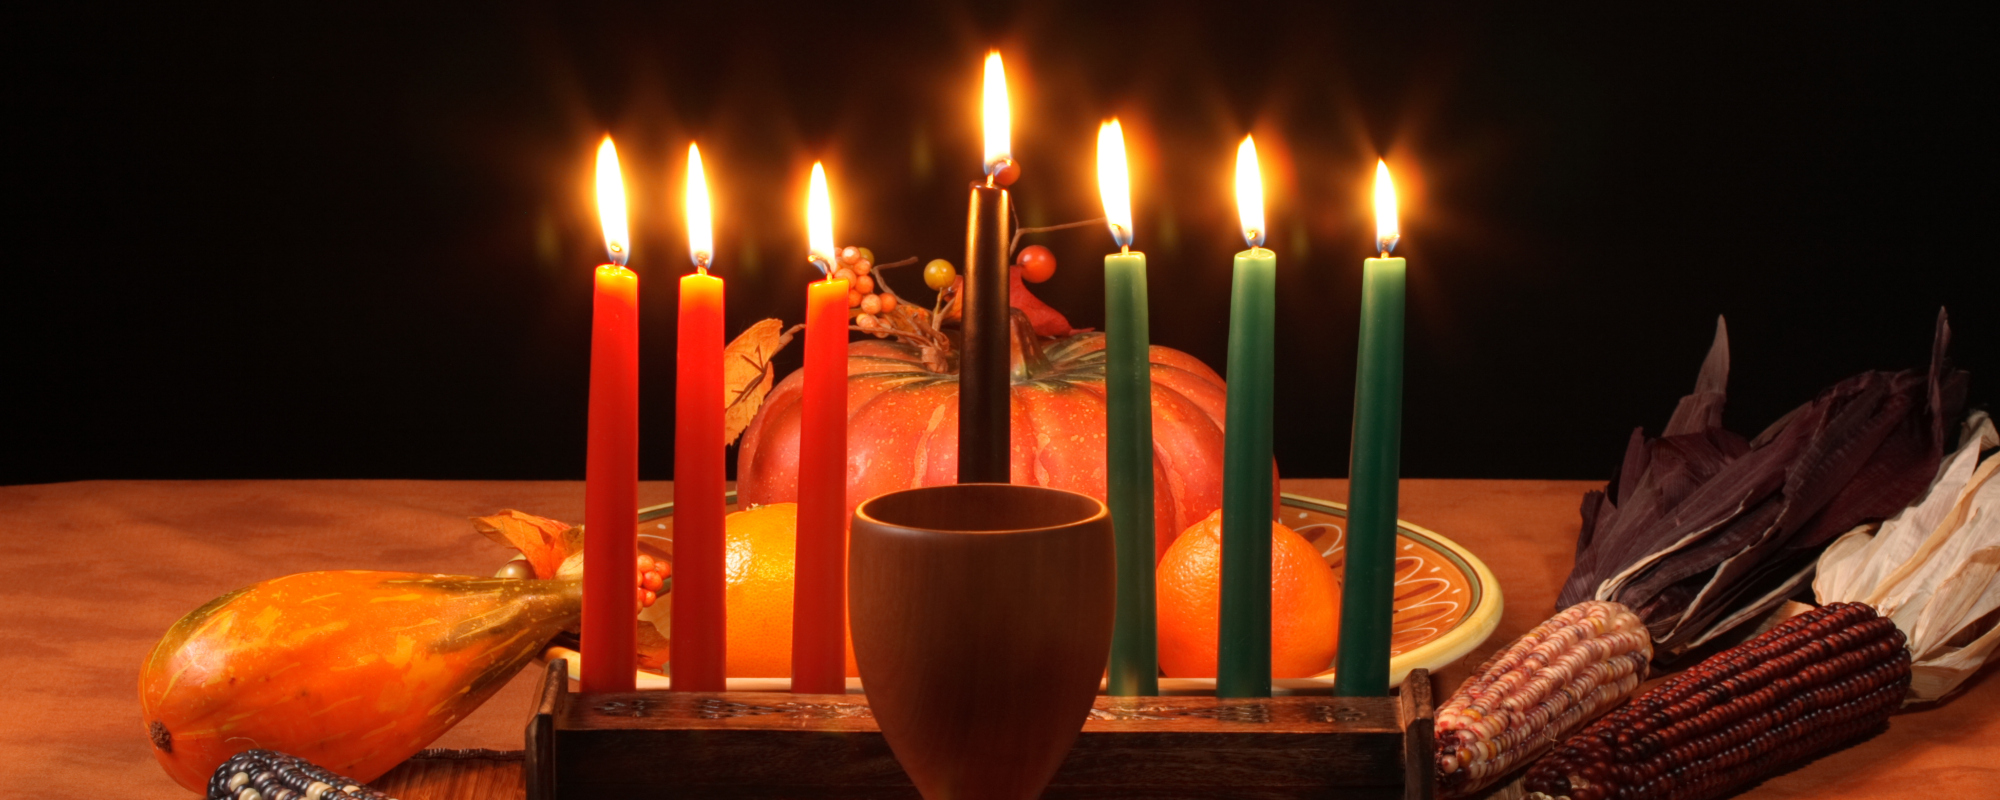 5 of the Best Kwanzaa Songs for the Season